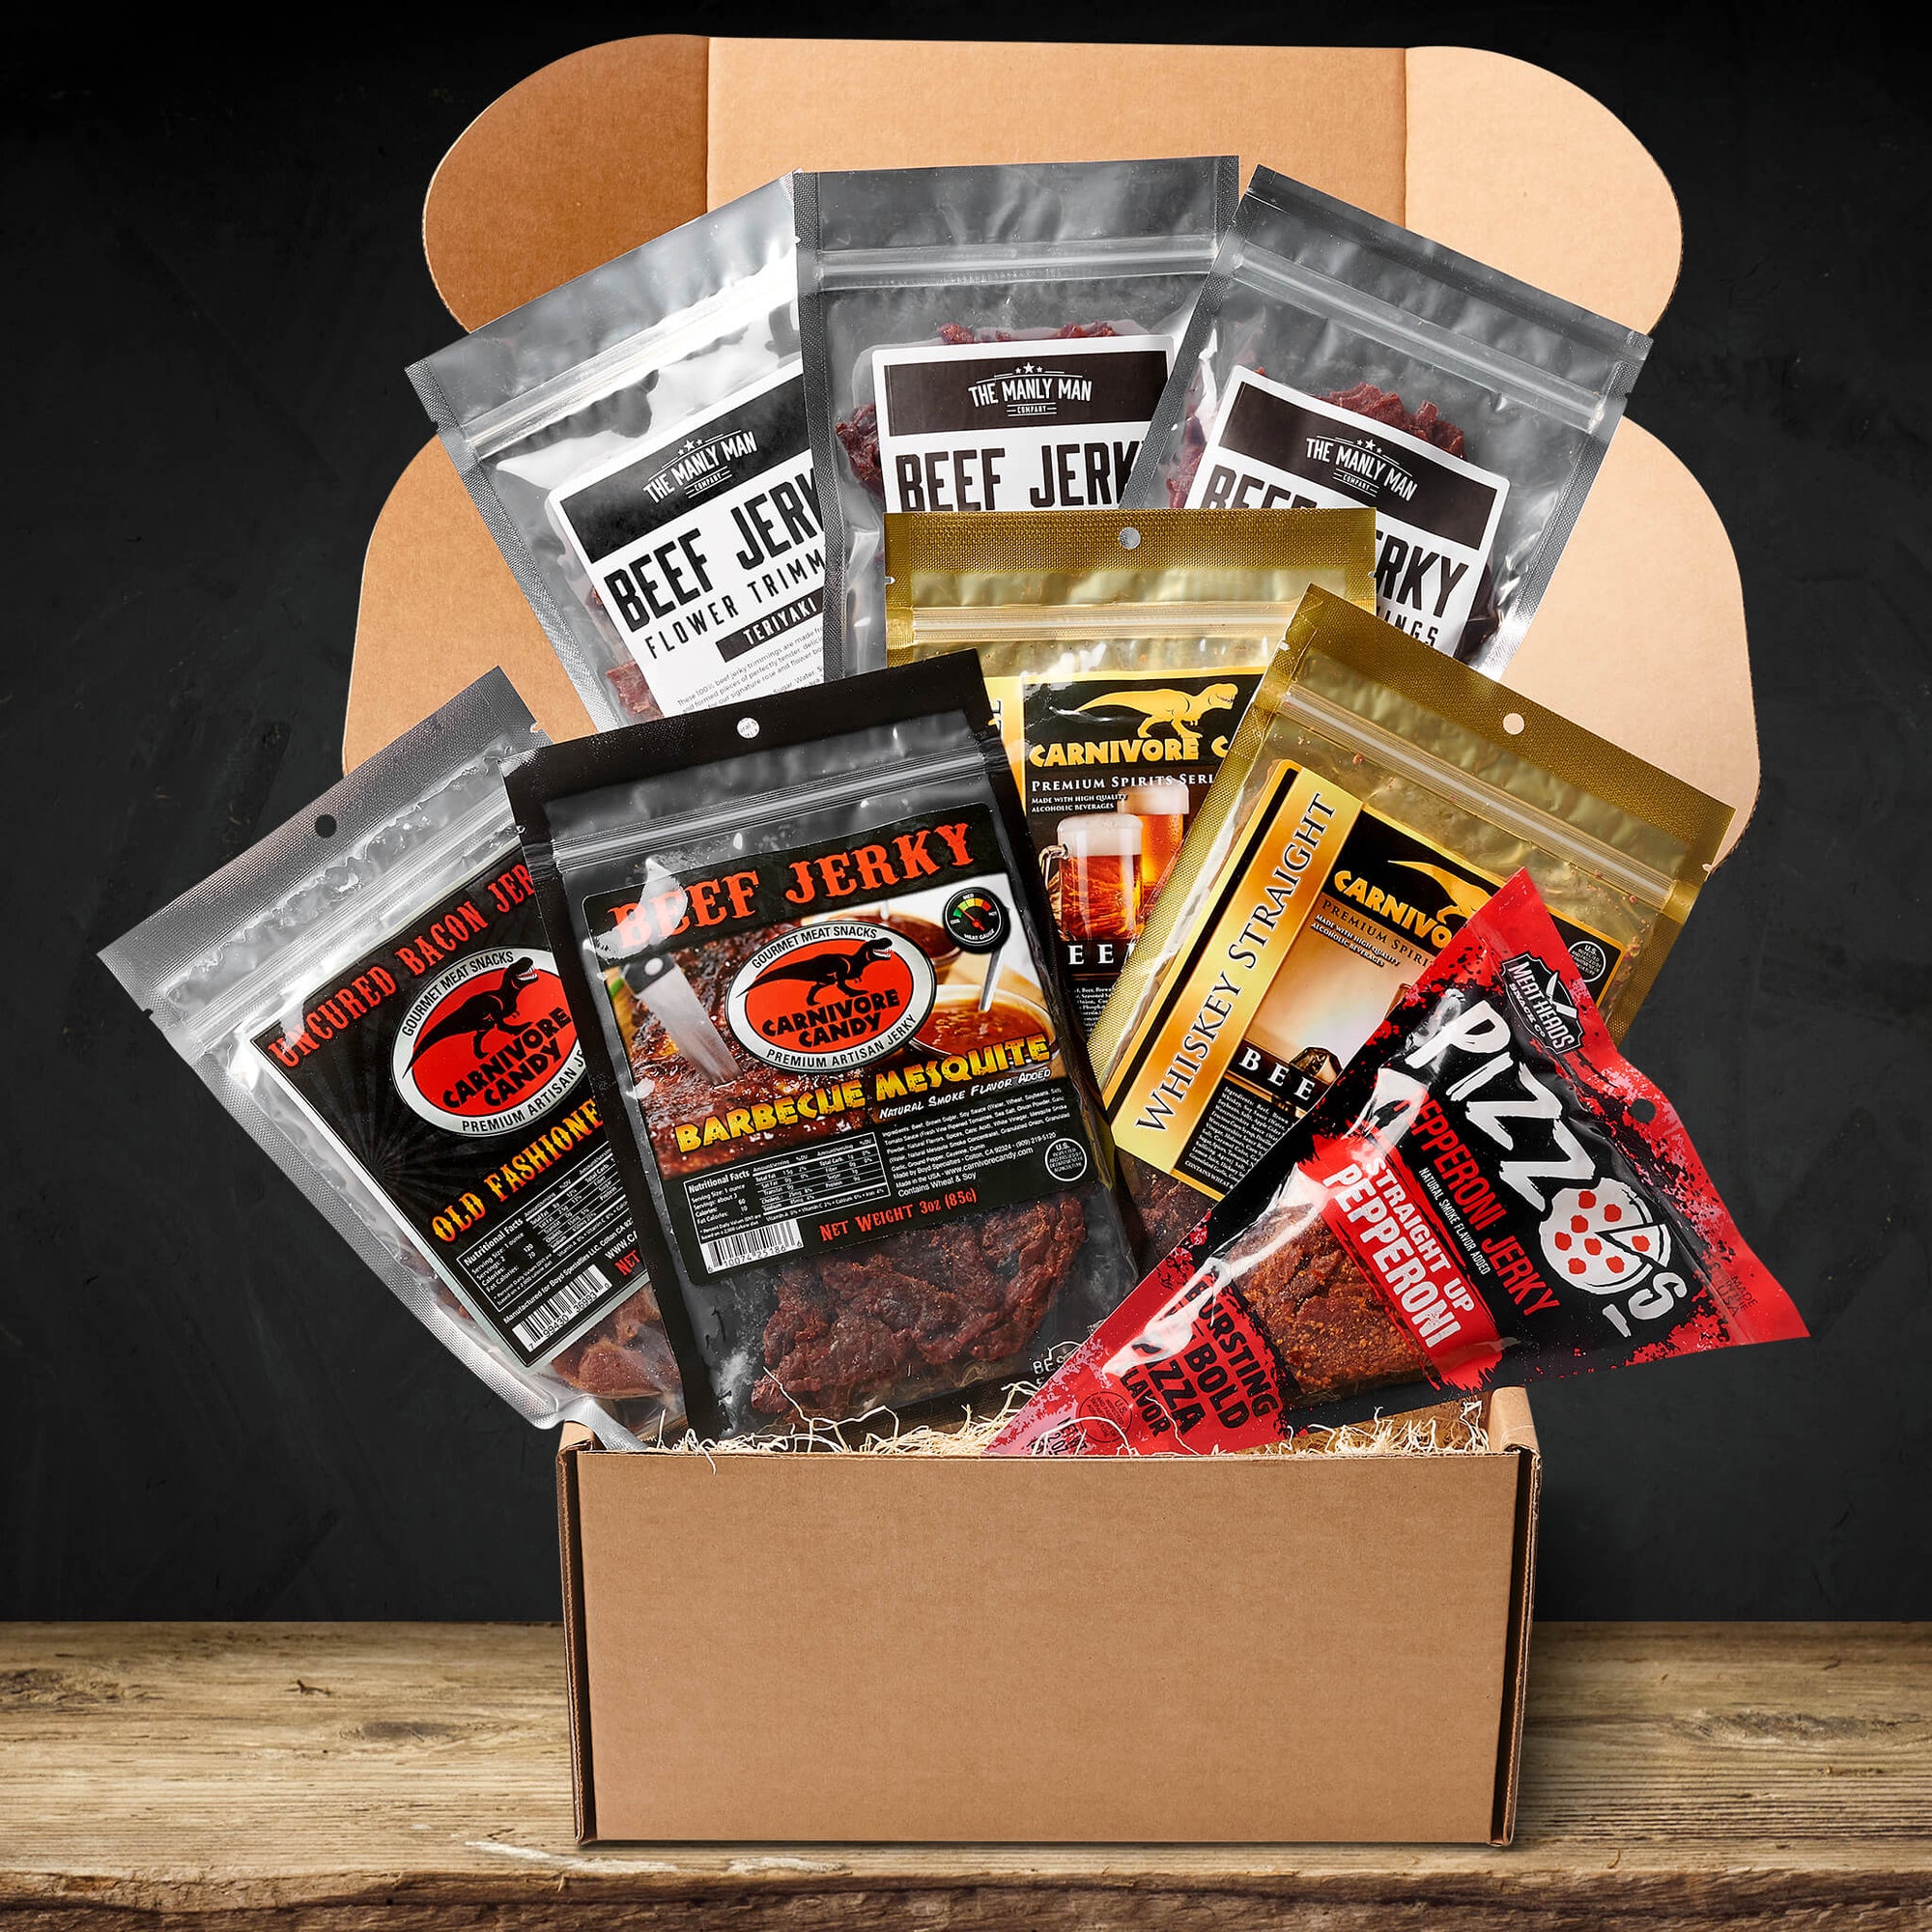 Exotic jerky gift box sitting on wood floor and in front of black background